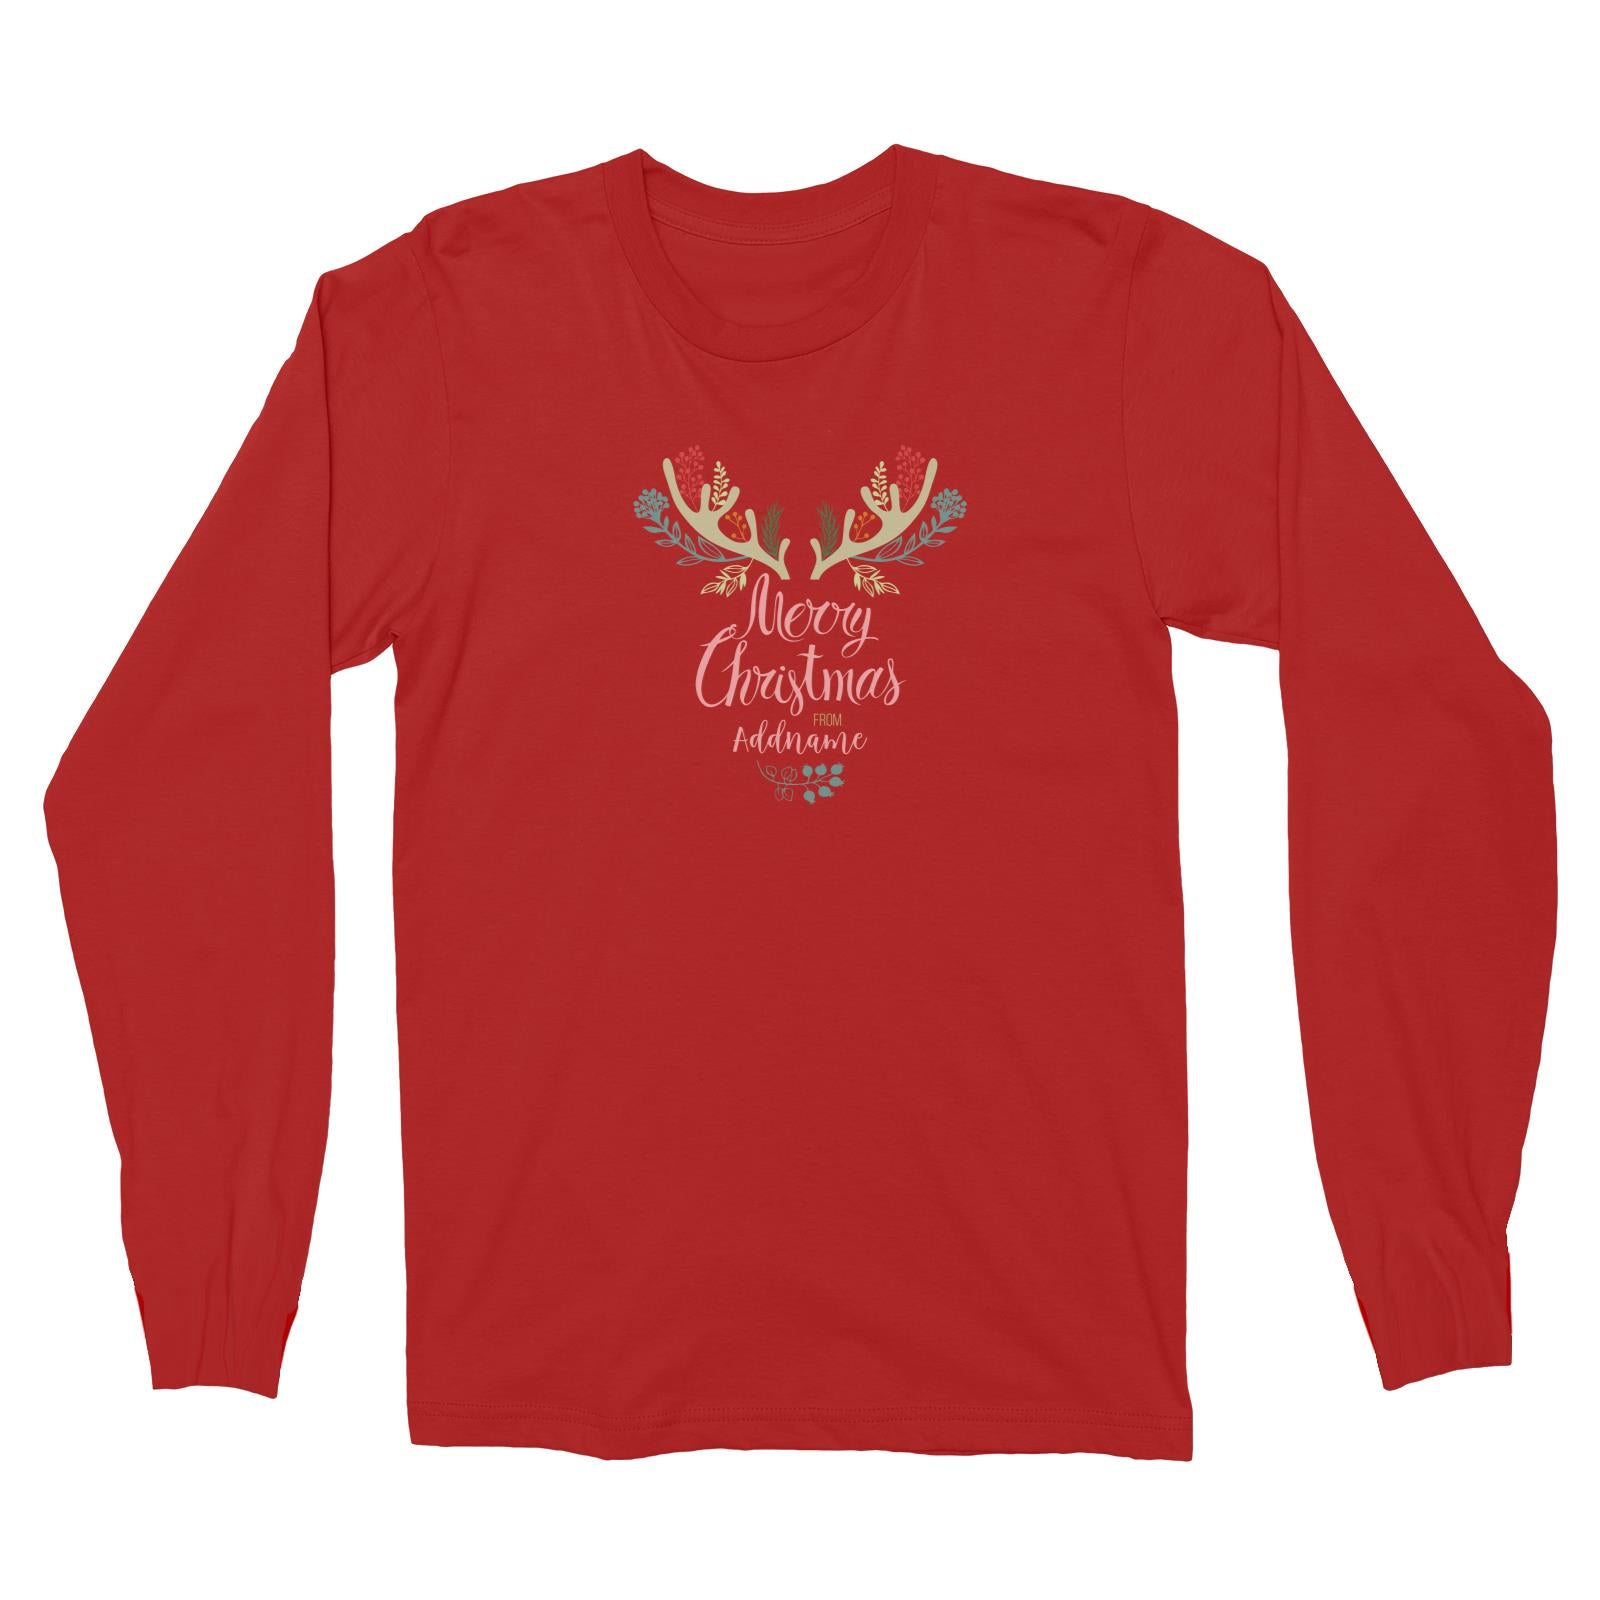 Christmas Reindeer Icon With Merry Christmas Addname Long Sleeve Unisex T-Shirt